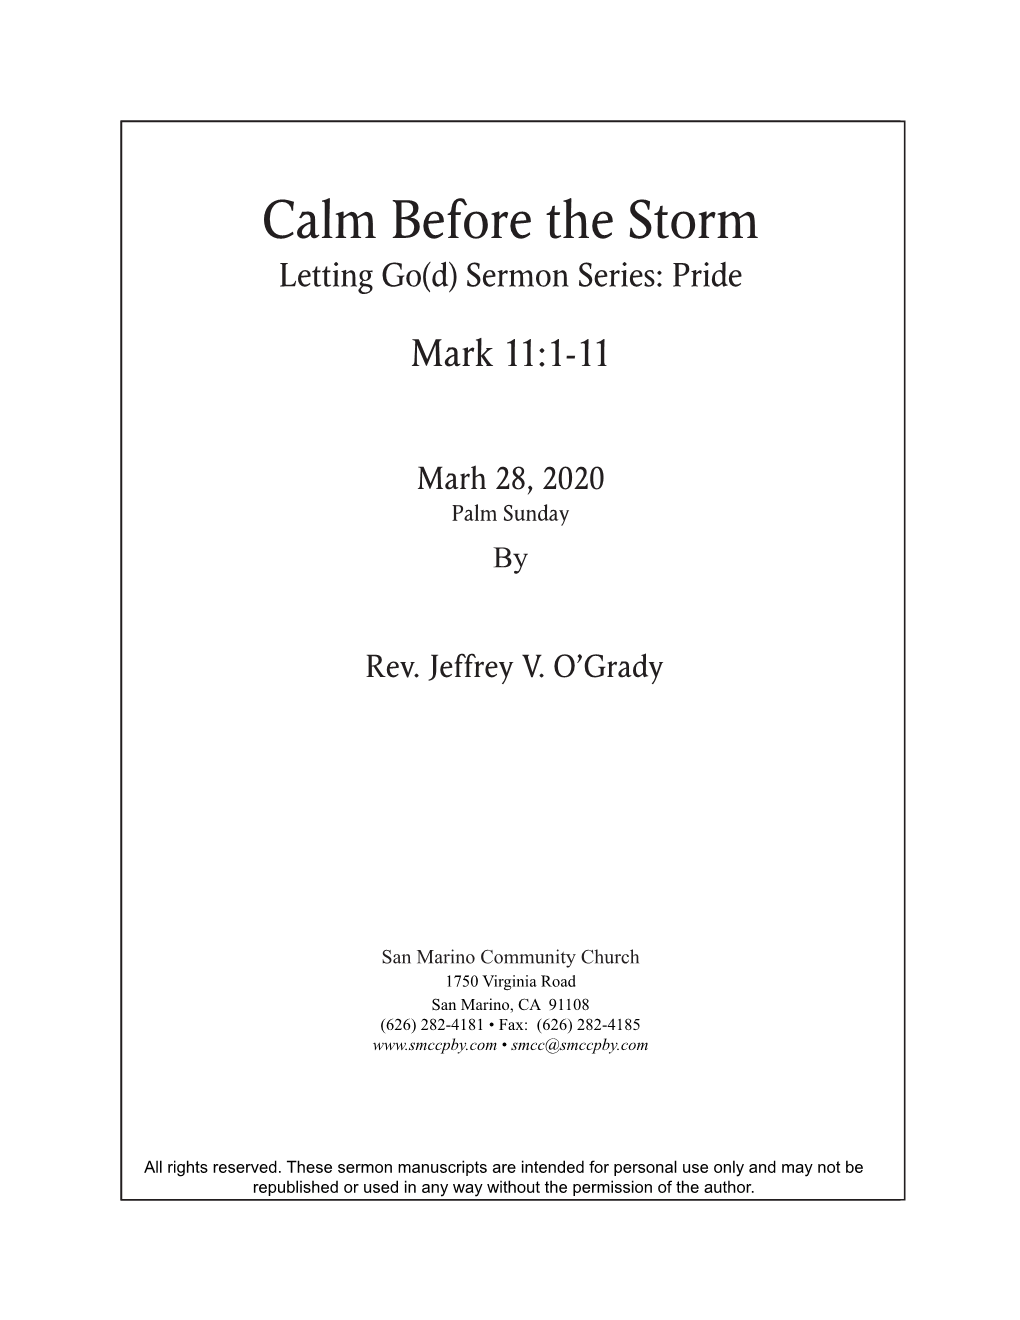 Calm Before the Storm Letting Go(D) Sermon Series: Pride Promises, Promises Markruth 11:1-111:1-18